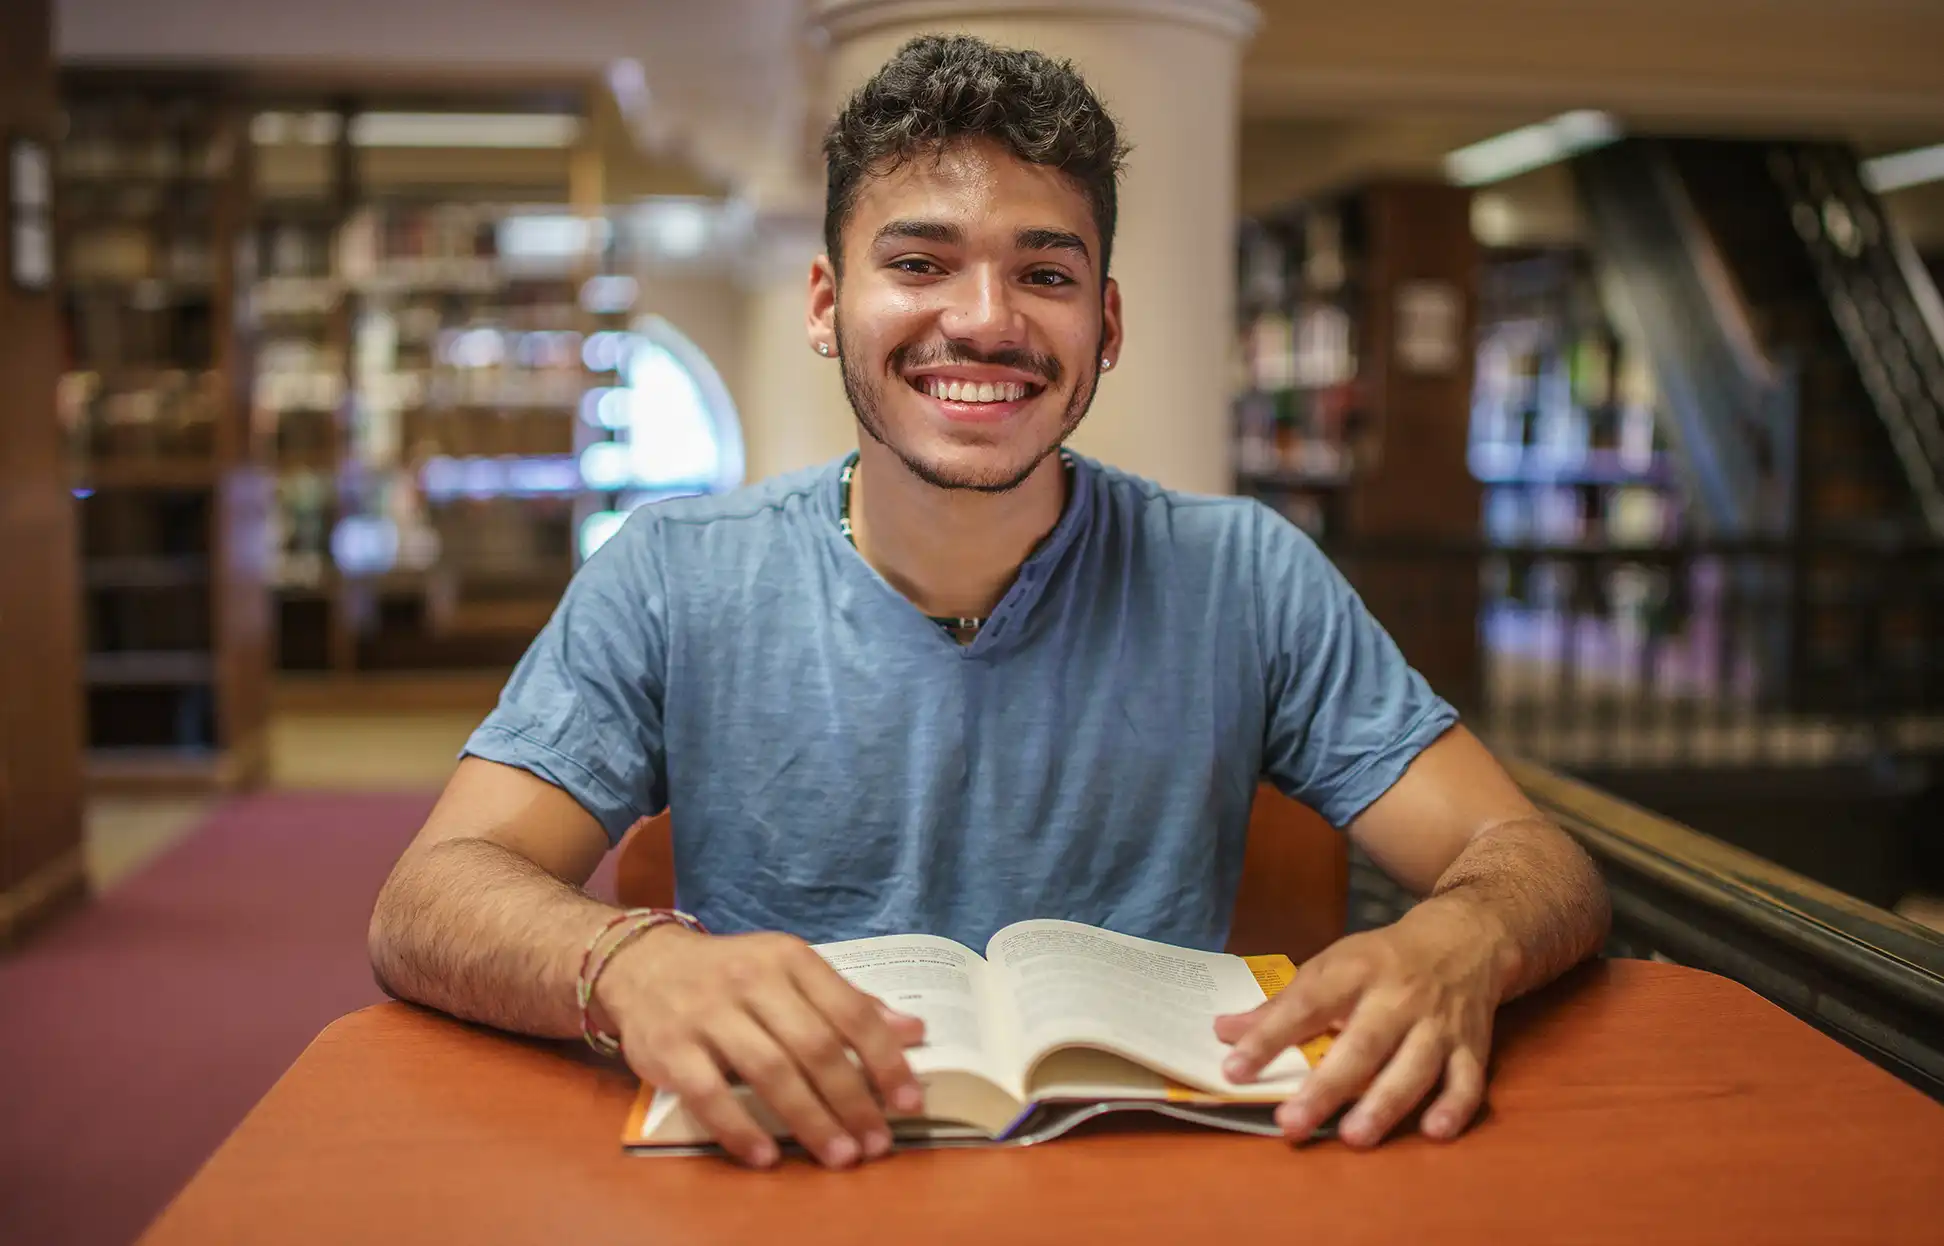 Student at a desk in a library with a book looking up and smiling